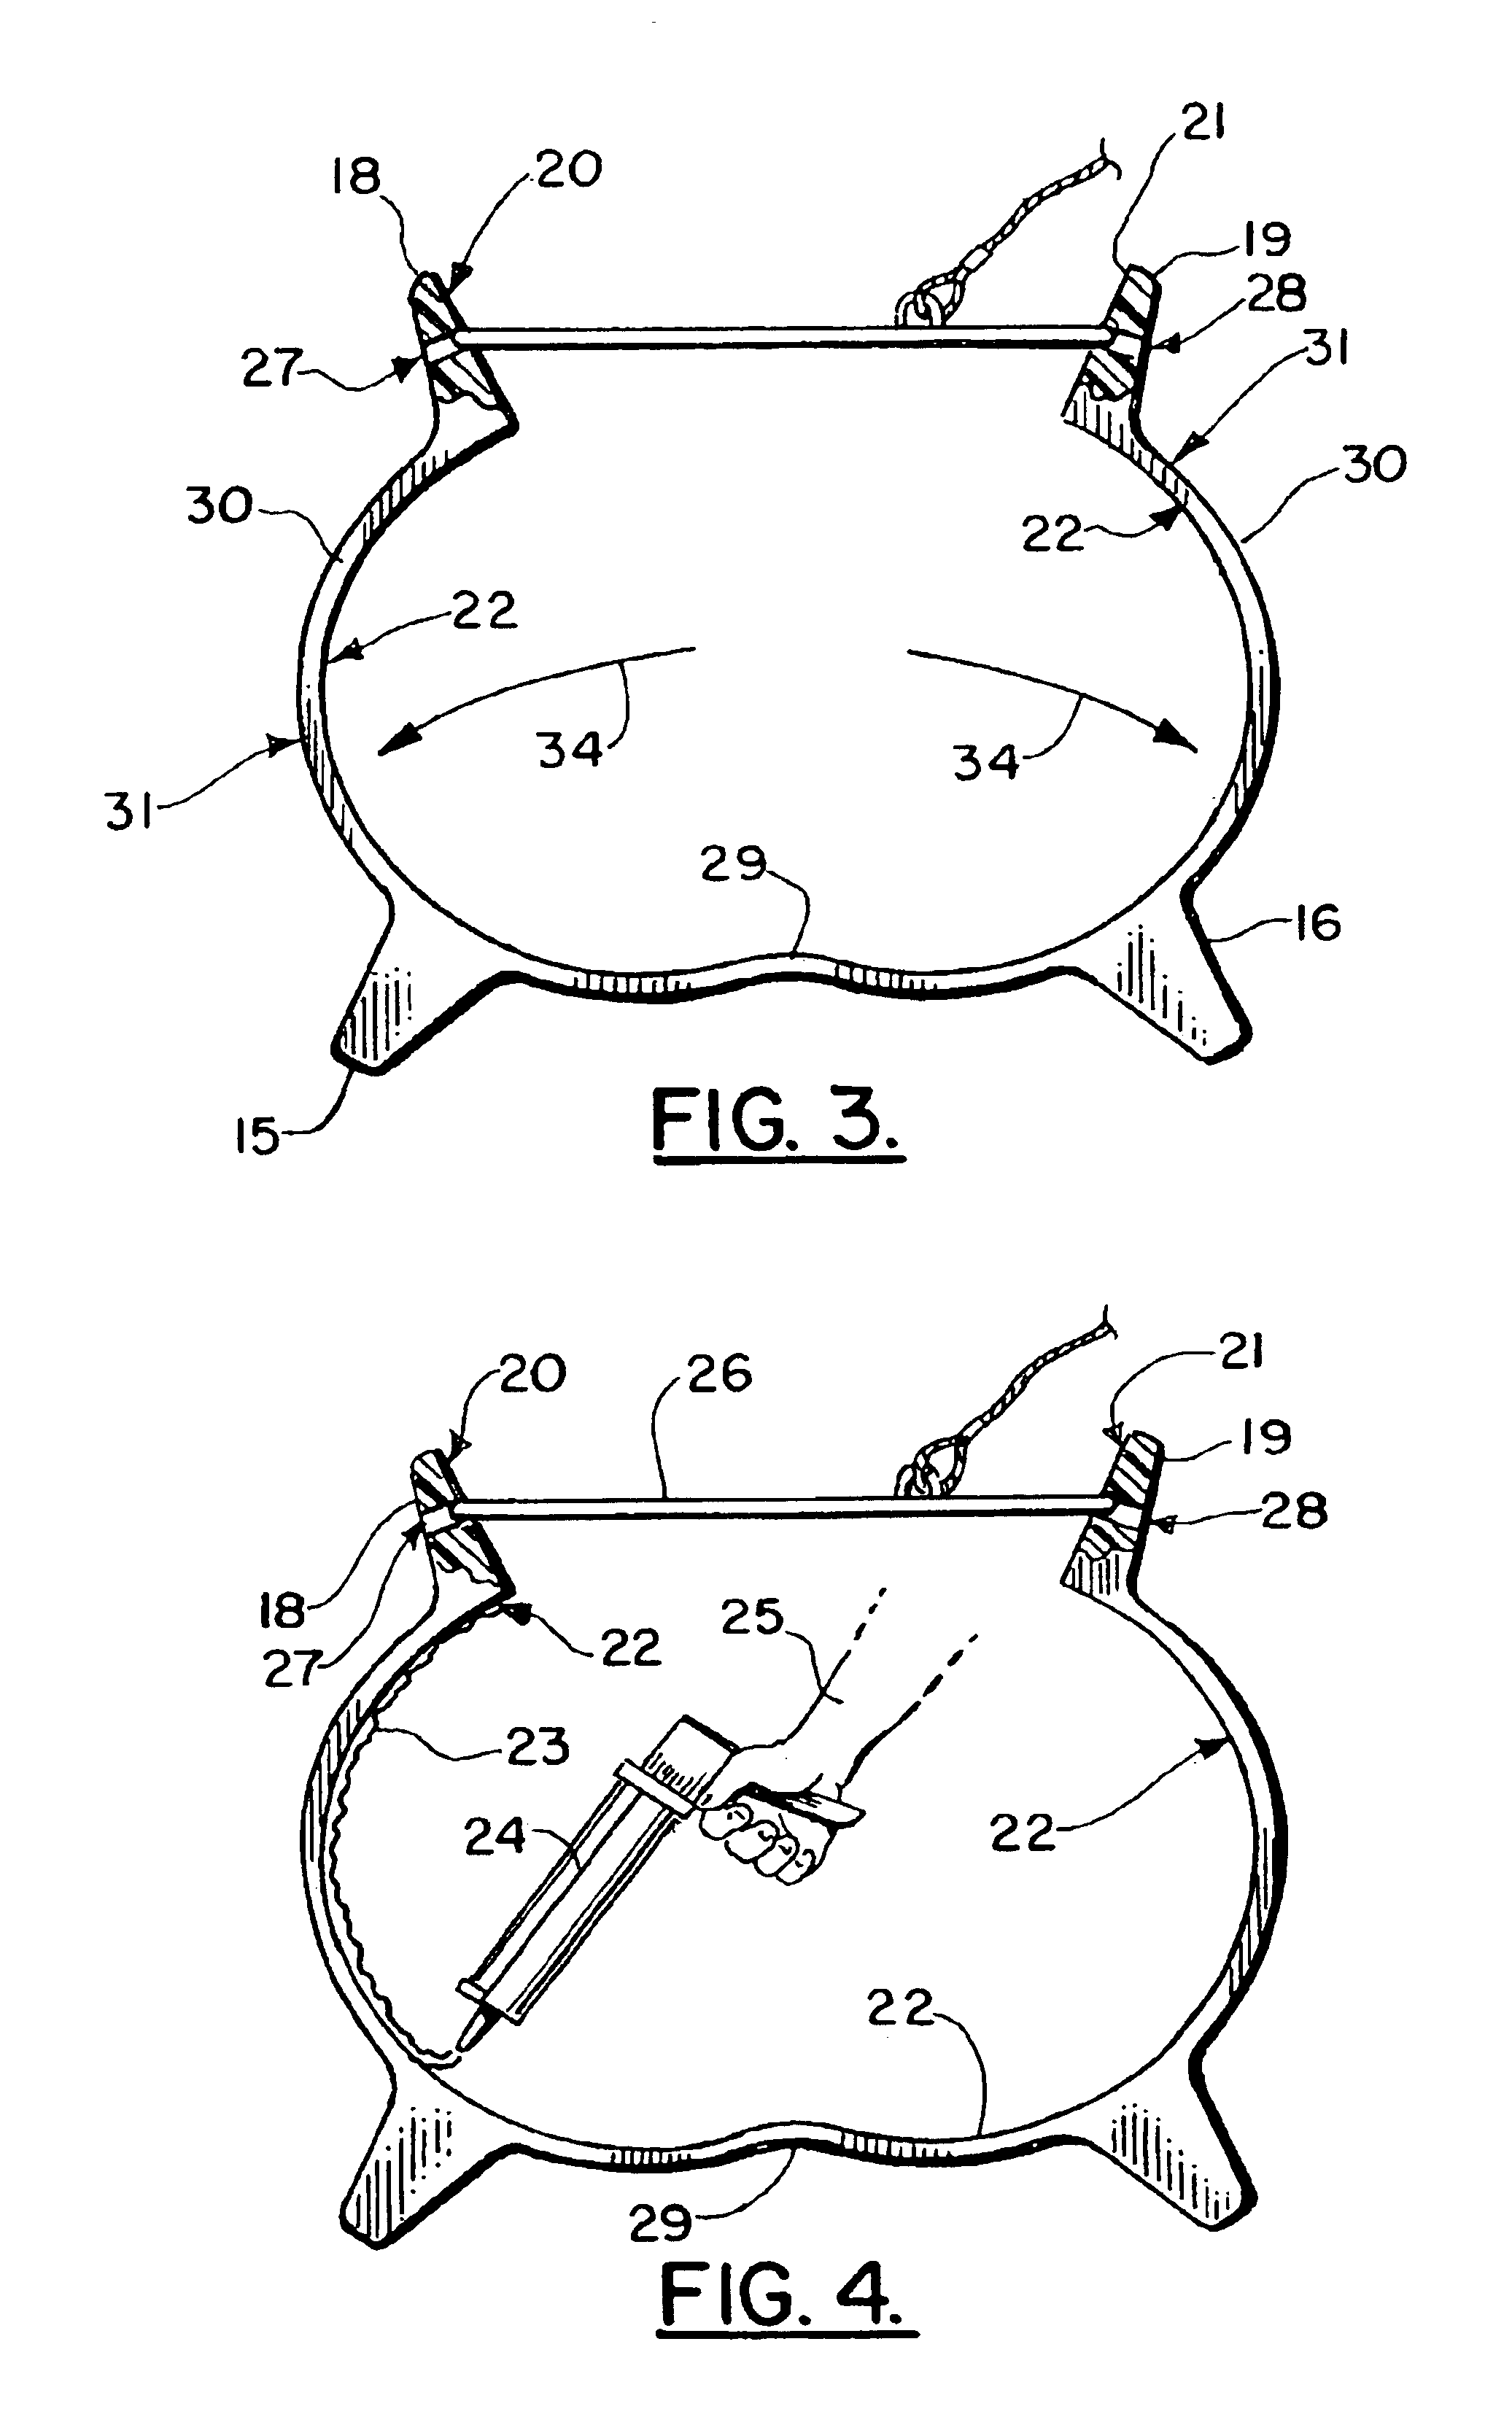 Vortex induced vibration suppression device and method